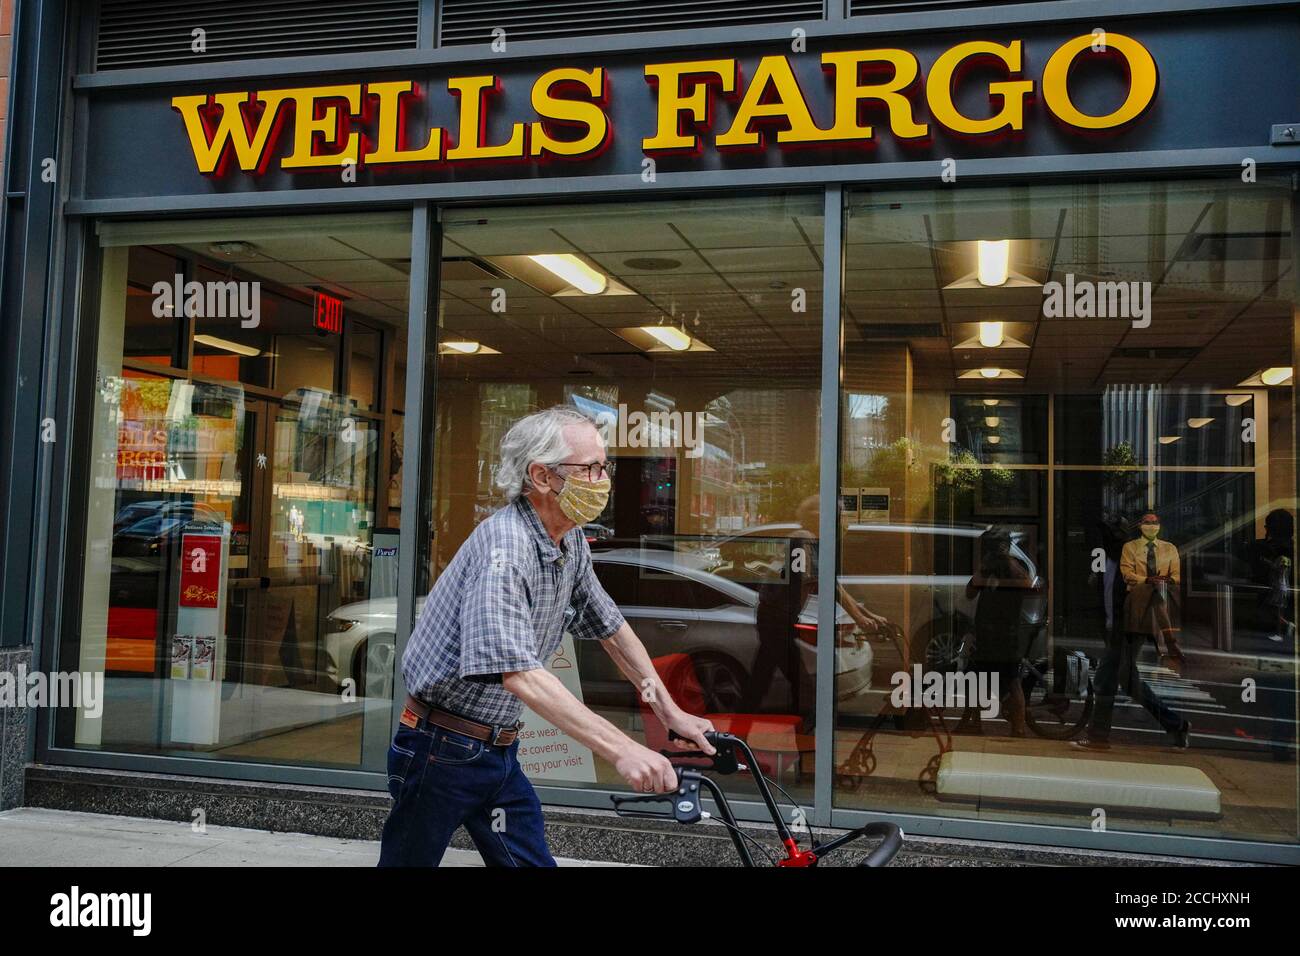 New York, NY, USA. 21st Aug, 2020. A man wearing a face mask passes by a Well Fargo branch in Midtown area of New York City. Wells Fargo resumes job cuts after pandemic break, report says. Credit: John Nacion/SOPA Images/ZUMA Wire/Alamy Live News Stock Photo